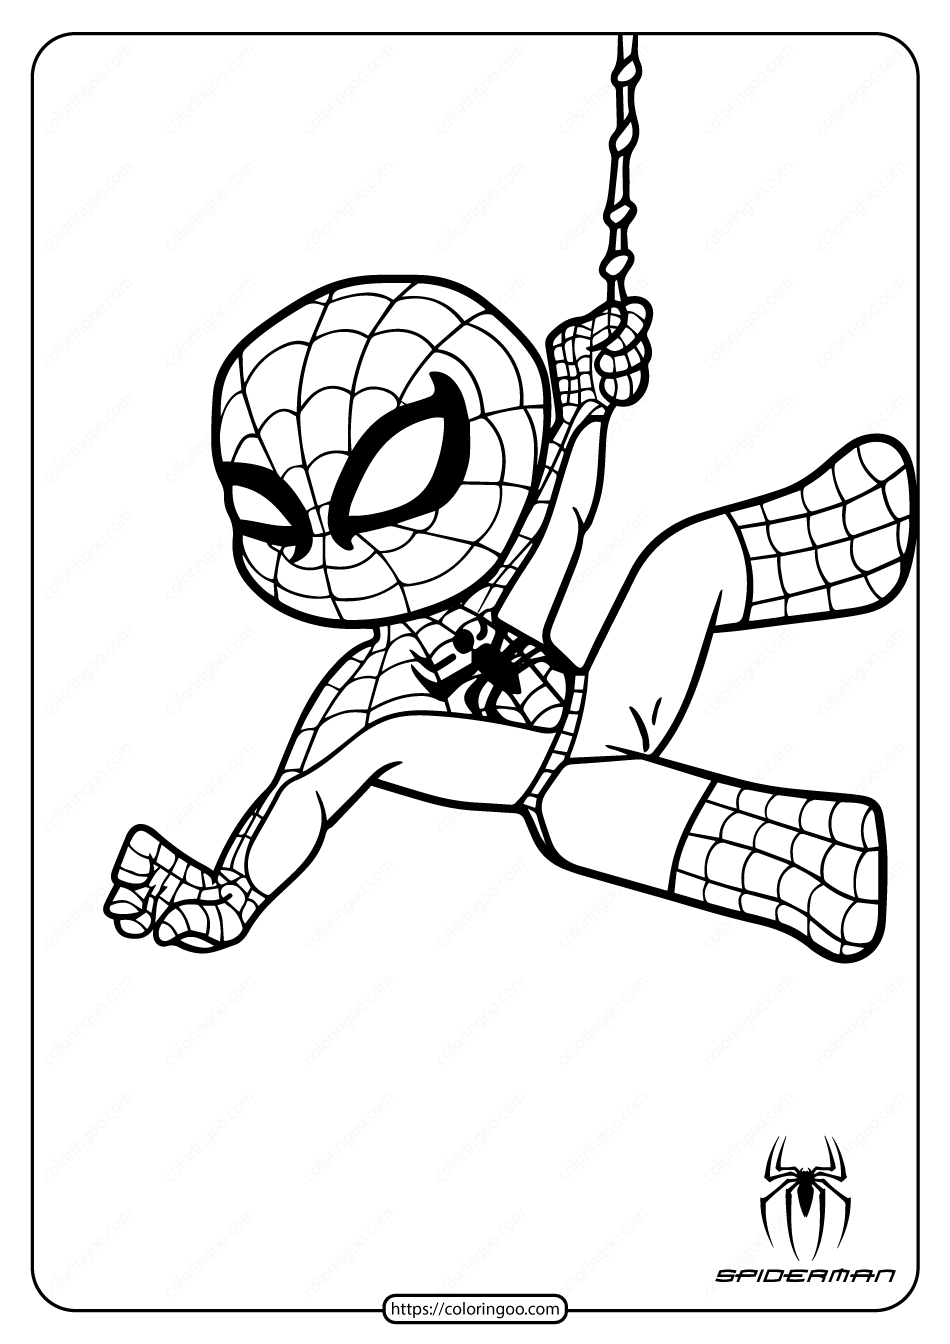 Cute spiderman coloring pages for kids avengers coloring pages spiderman coloring cartoon coloring pages